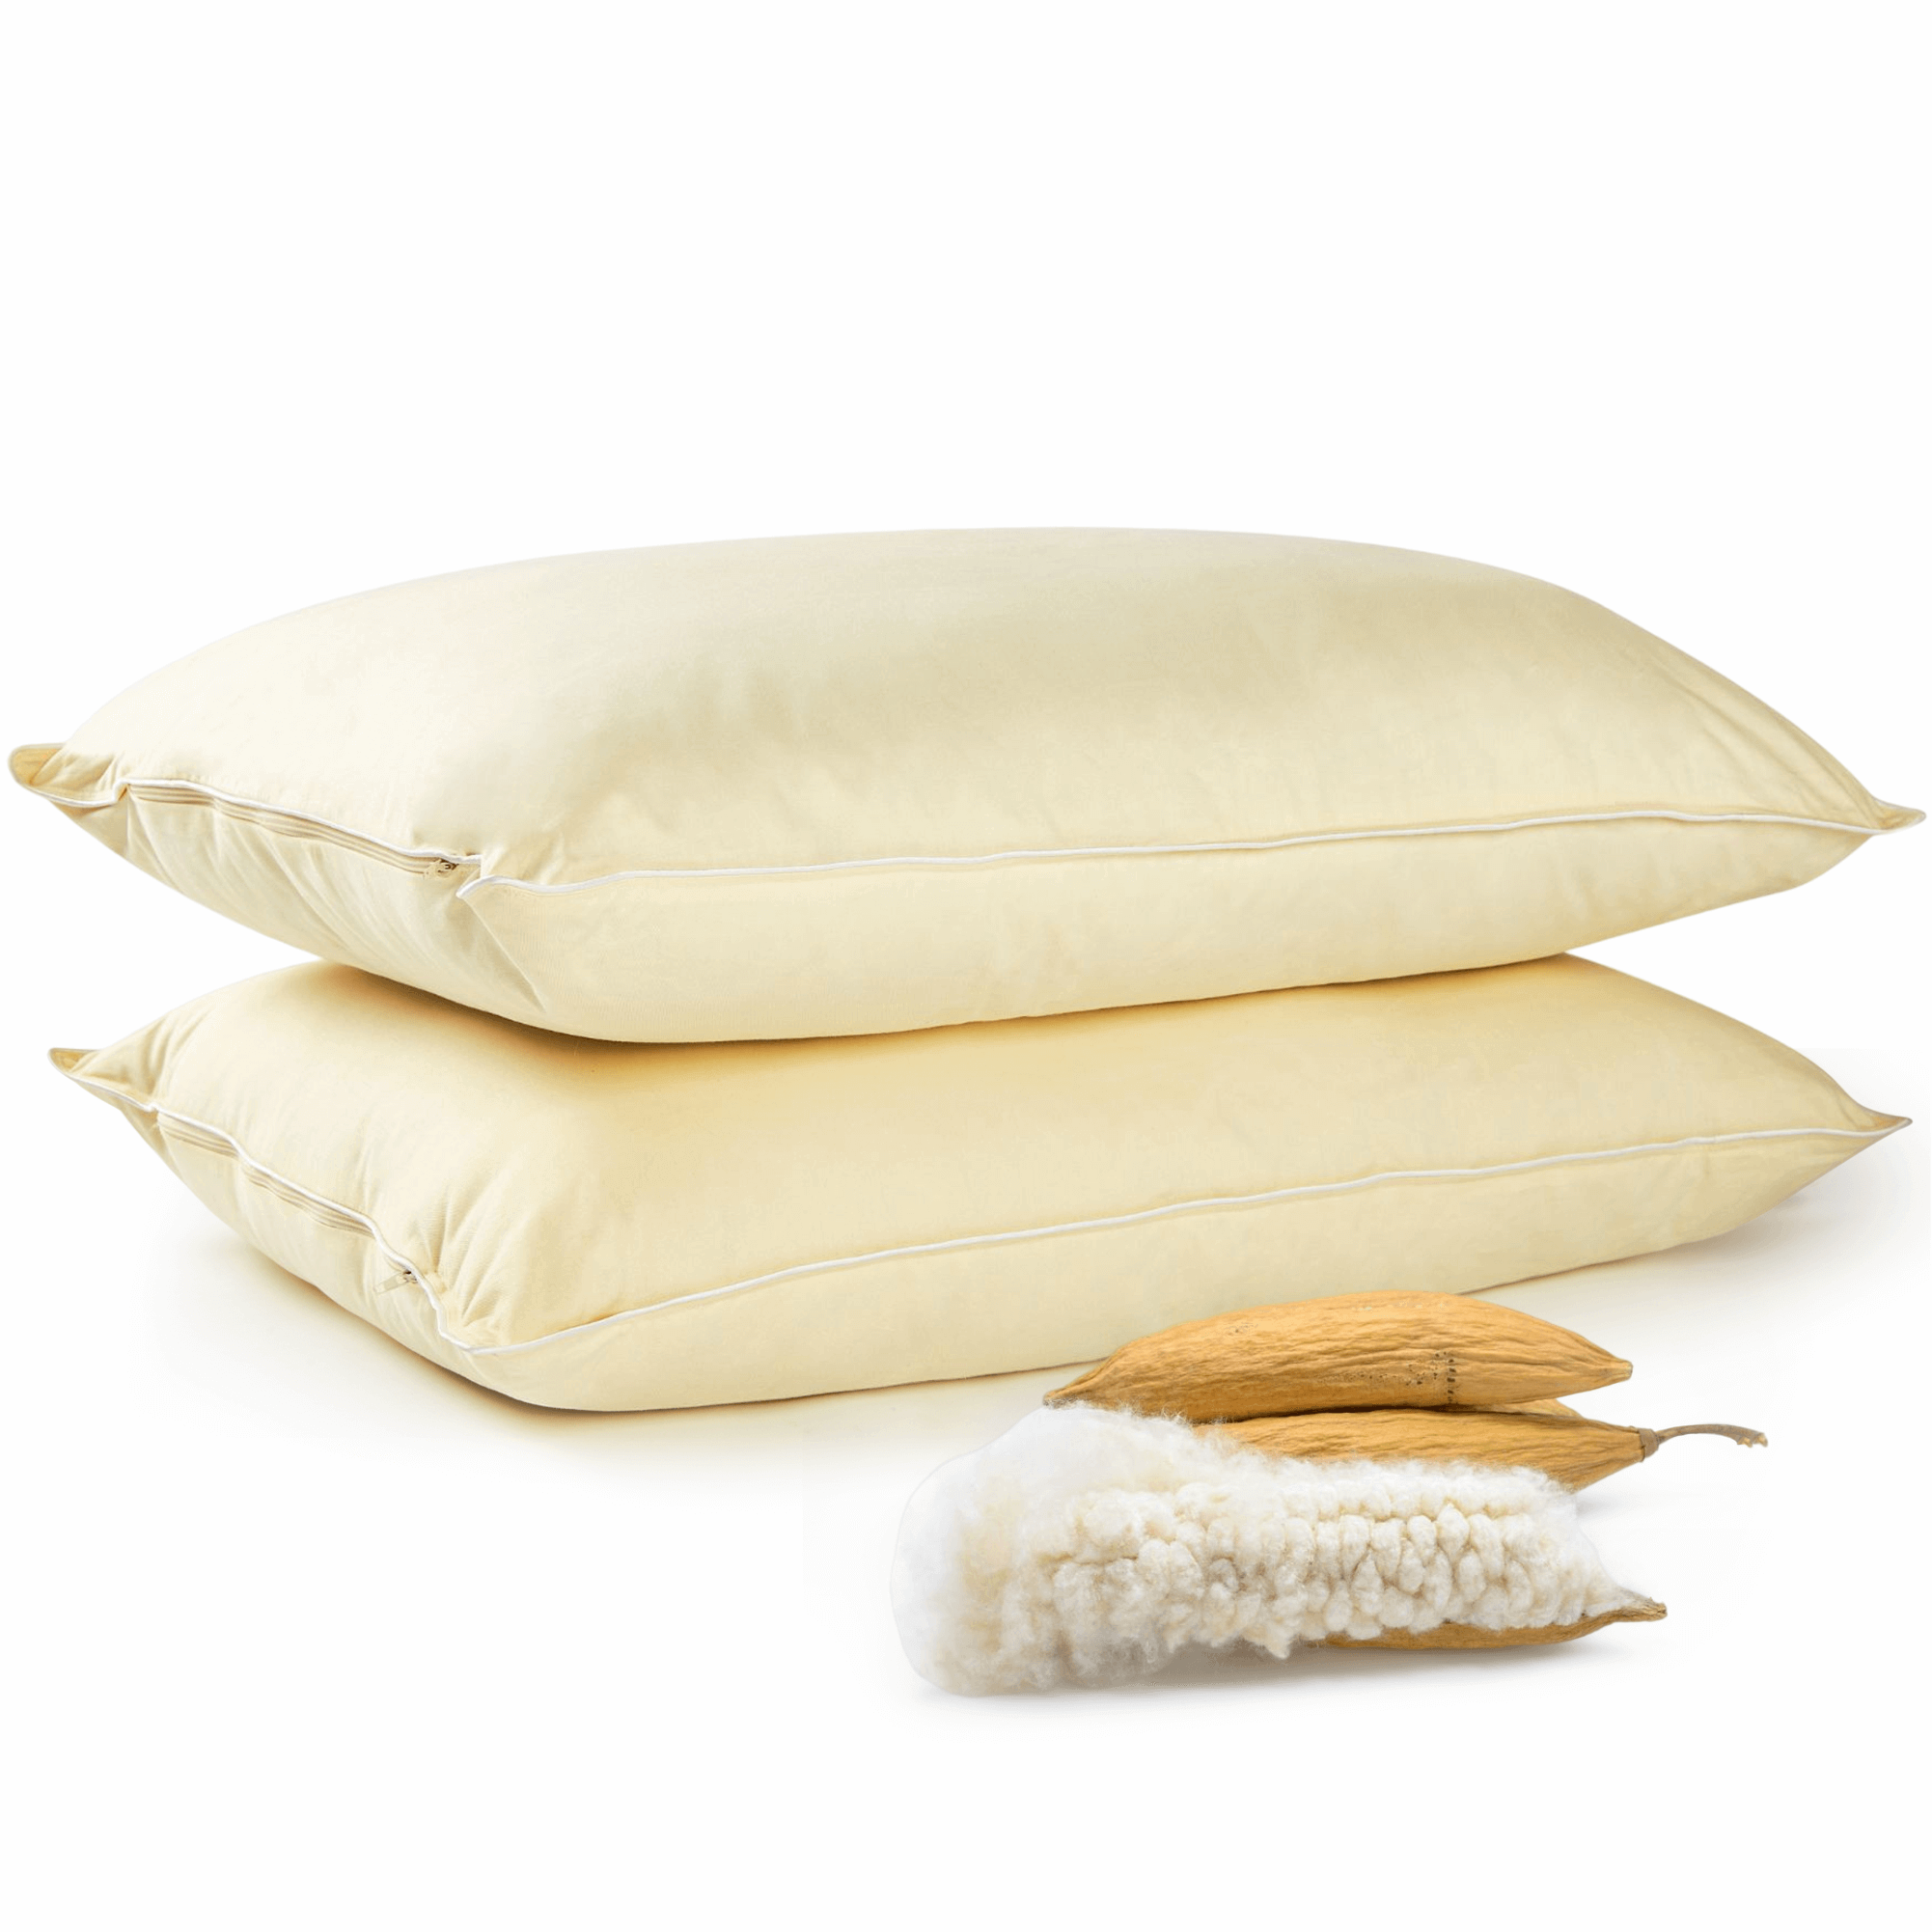 Xtreme Comforts Wedge Pillow Cover - Allergy-Friendly & Easy to Clean Cover  - Fits Our (27 'x 25 x 7) Wedge Pillow - (Only Cover Included)